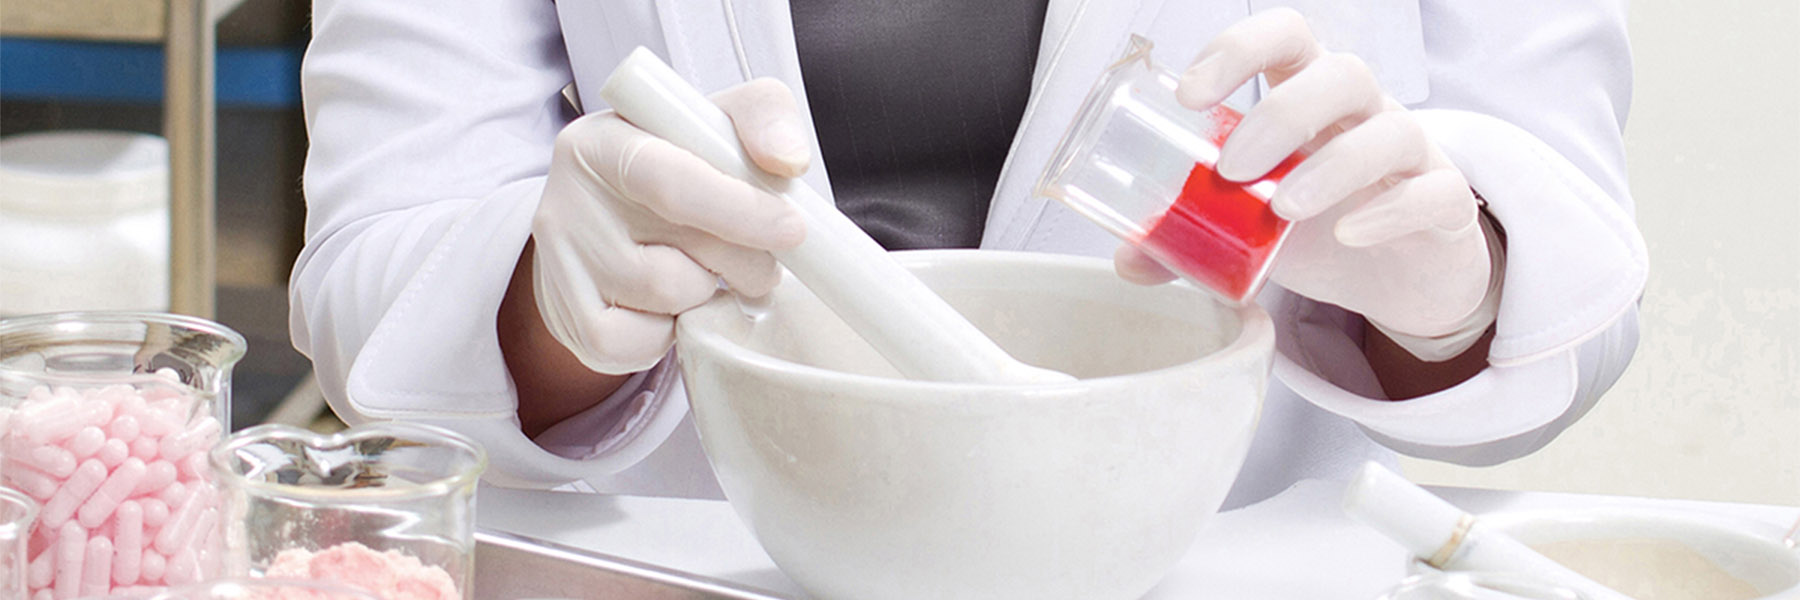 Lab technician in a pharmacy setting using a mortar and pestle.